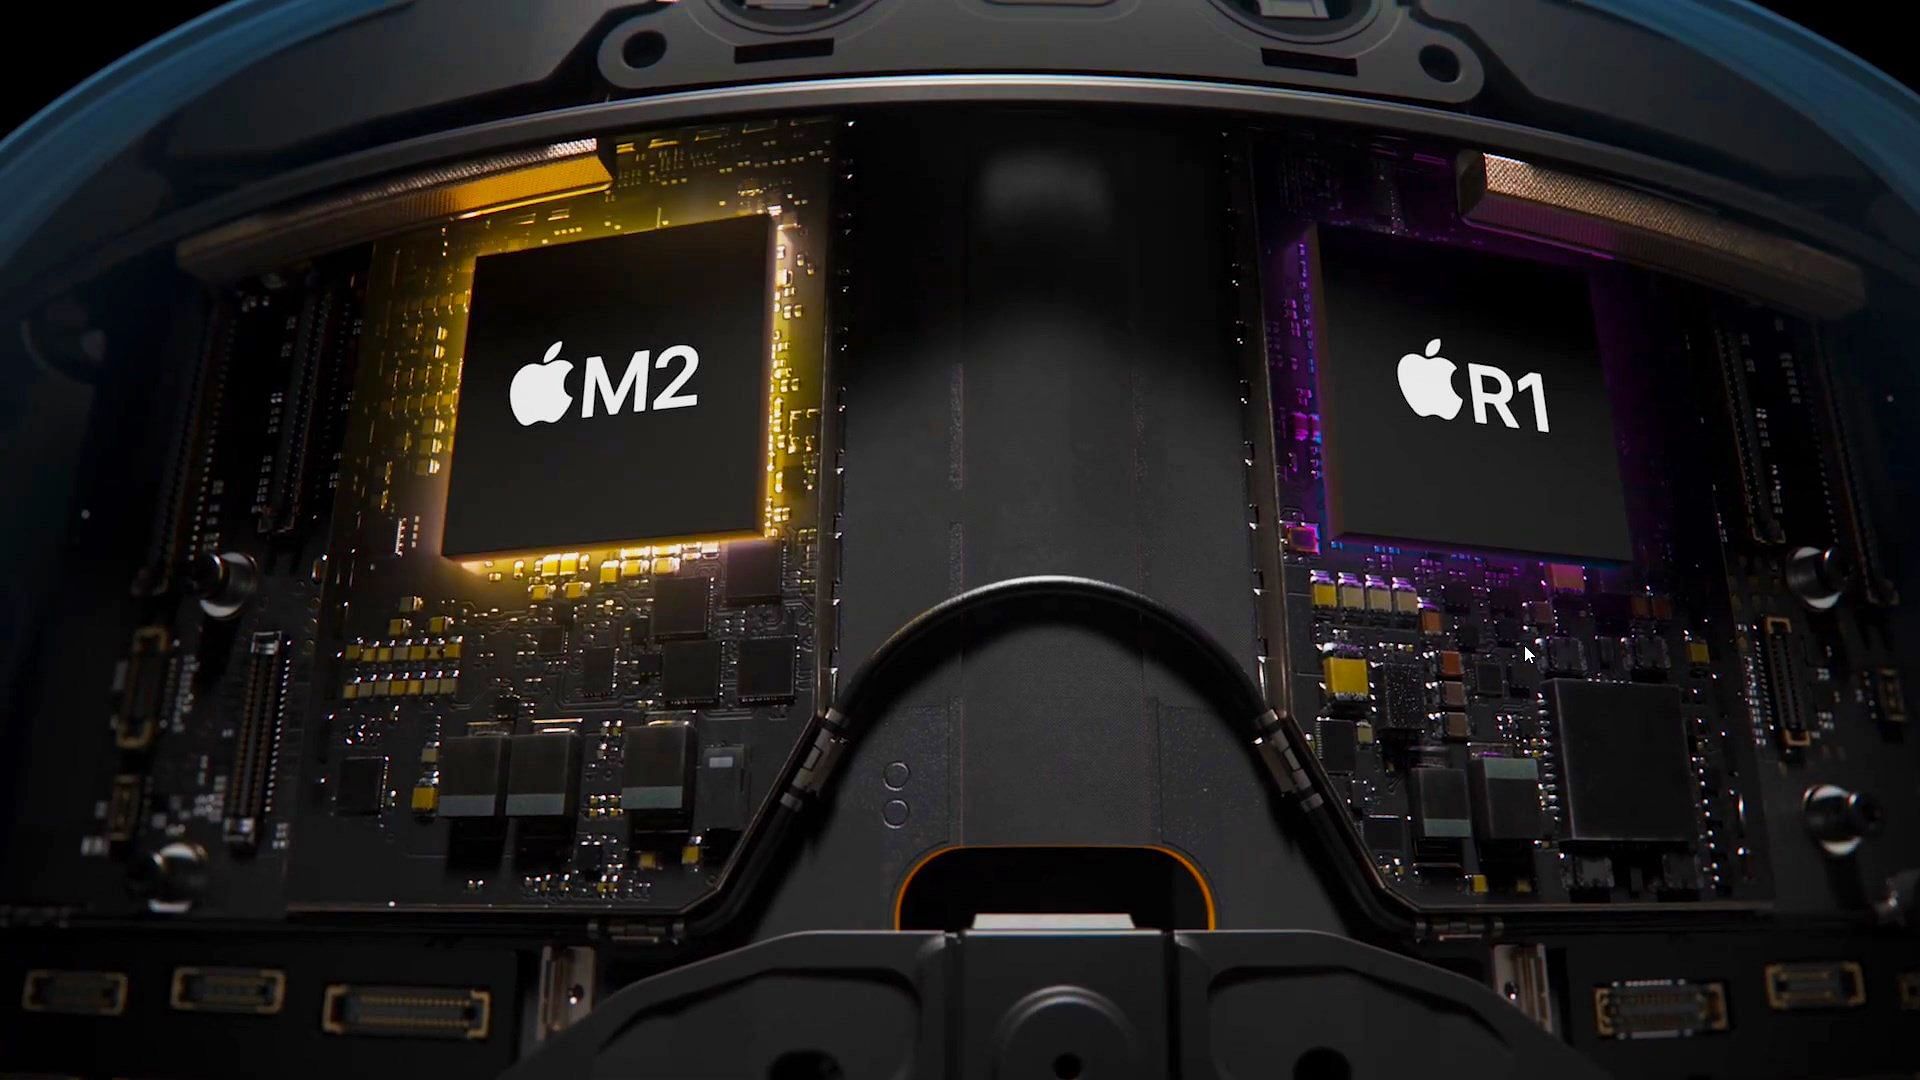 The Vision Pro comes with a new R1 chip and an M2 chip (Image via Apple)